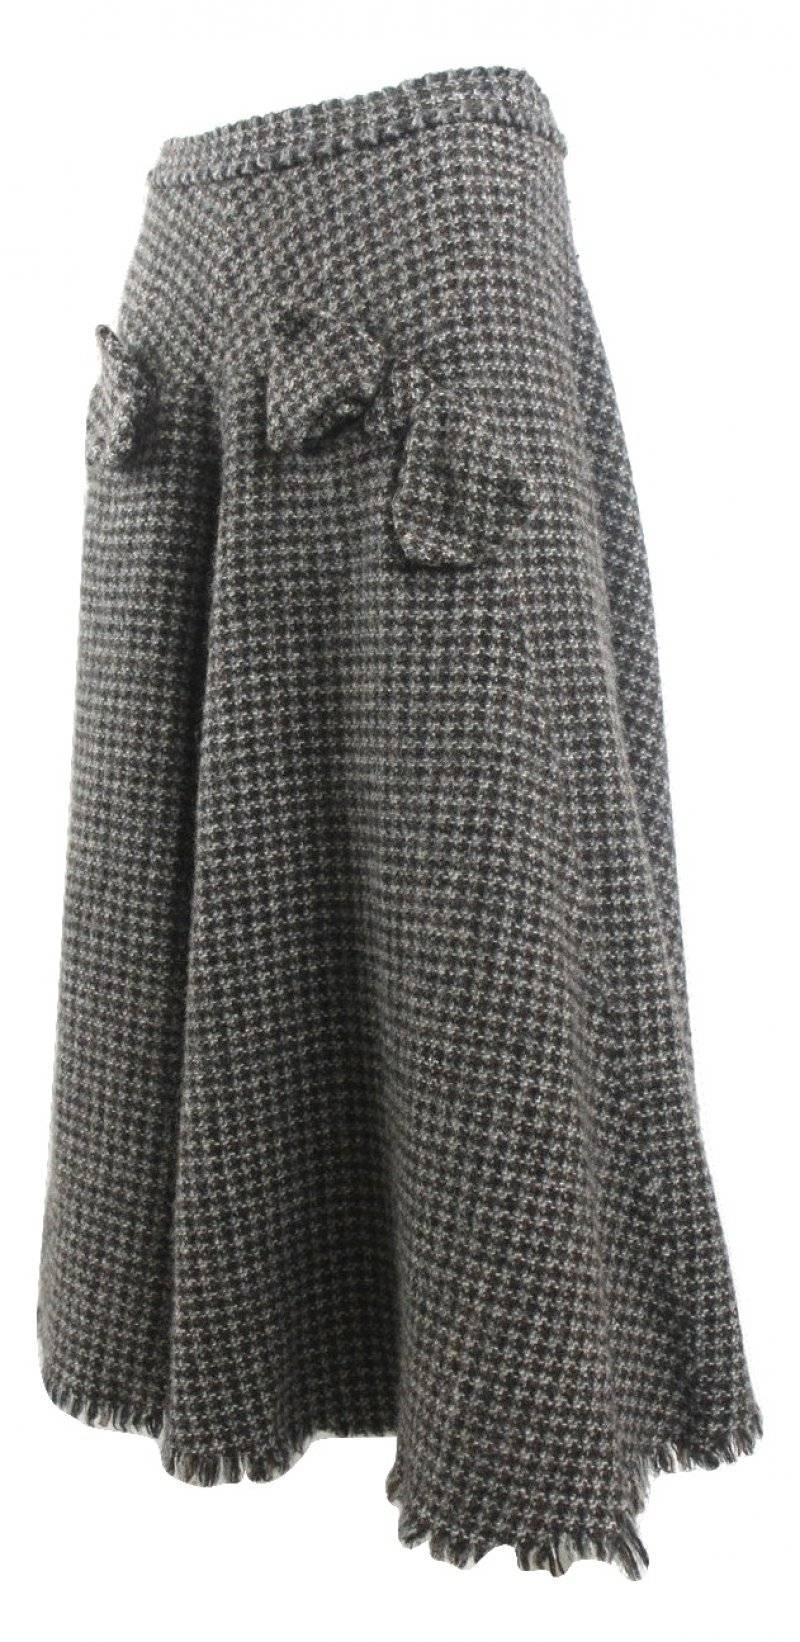 Junya Watanabe 2003 Collection
Wool Flared Skirt with Bow Decoration Runway Skirt
Labelled size M
Excellent condition